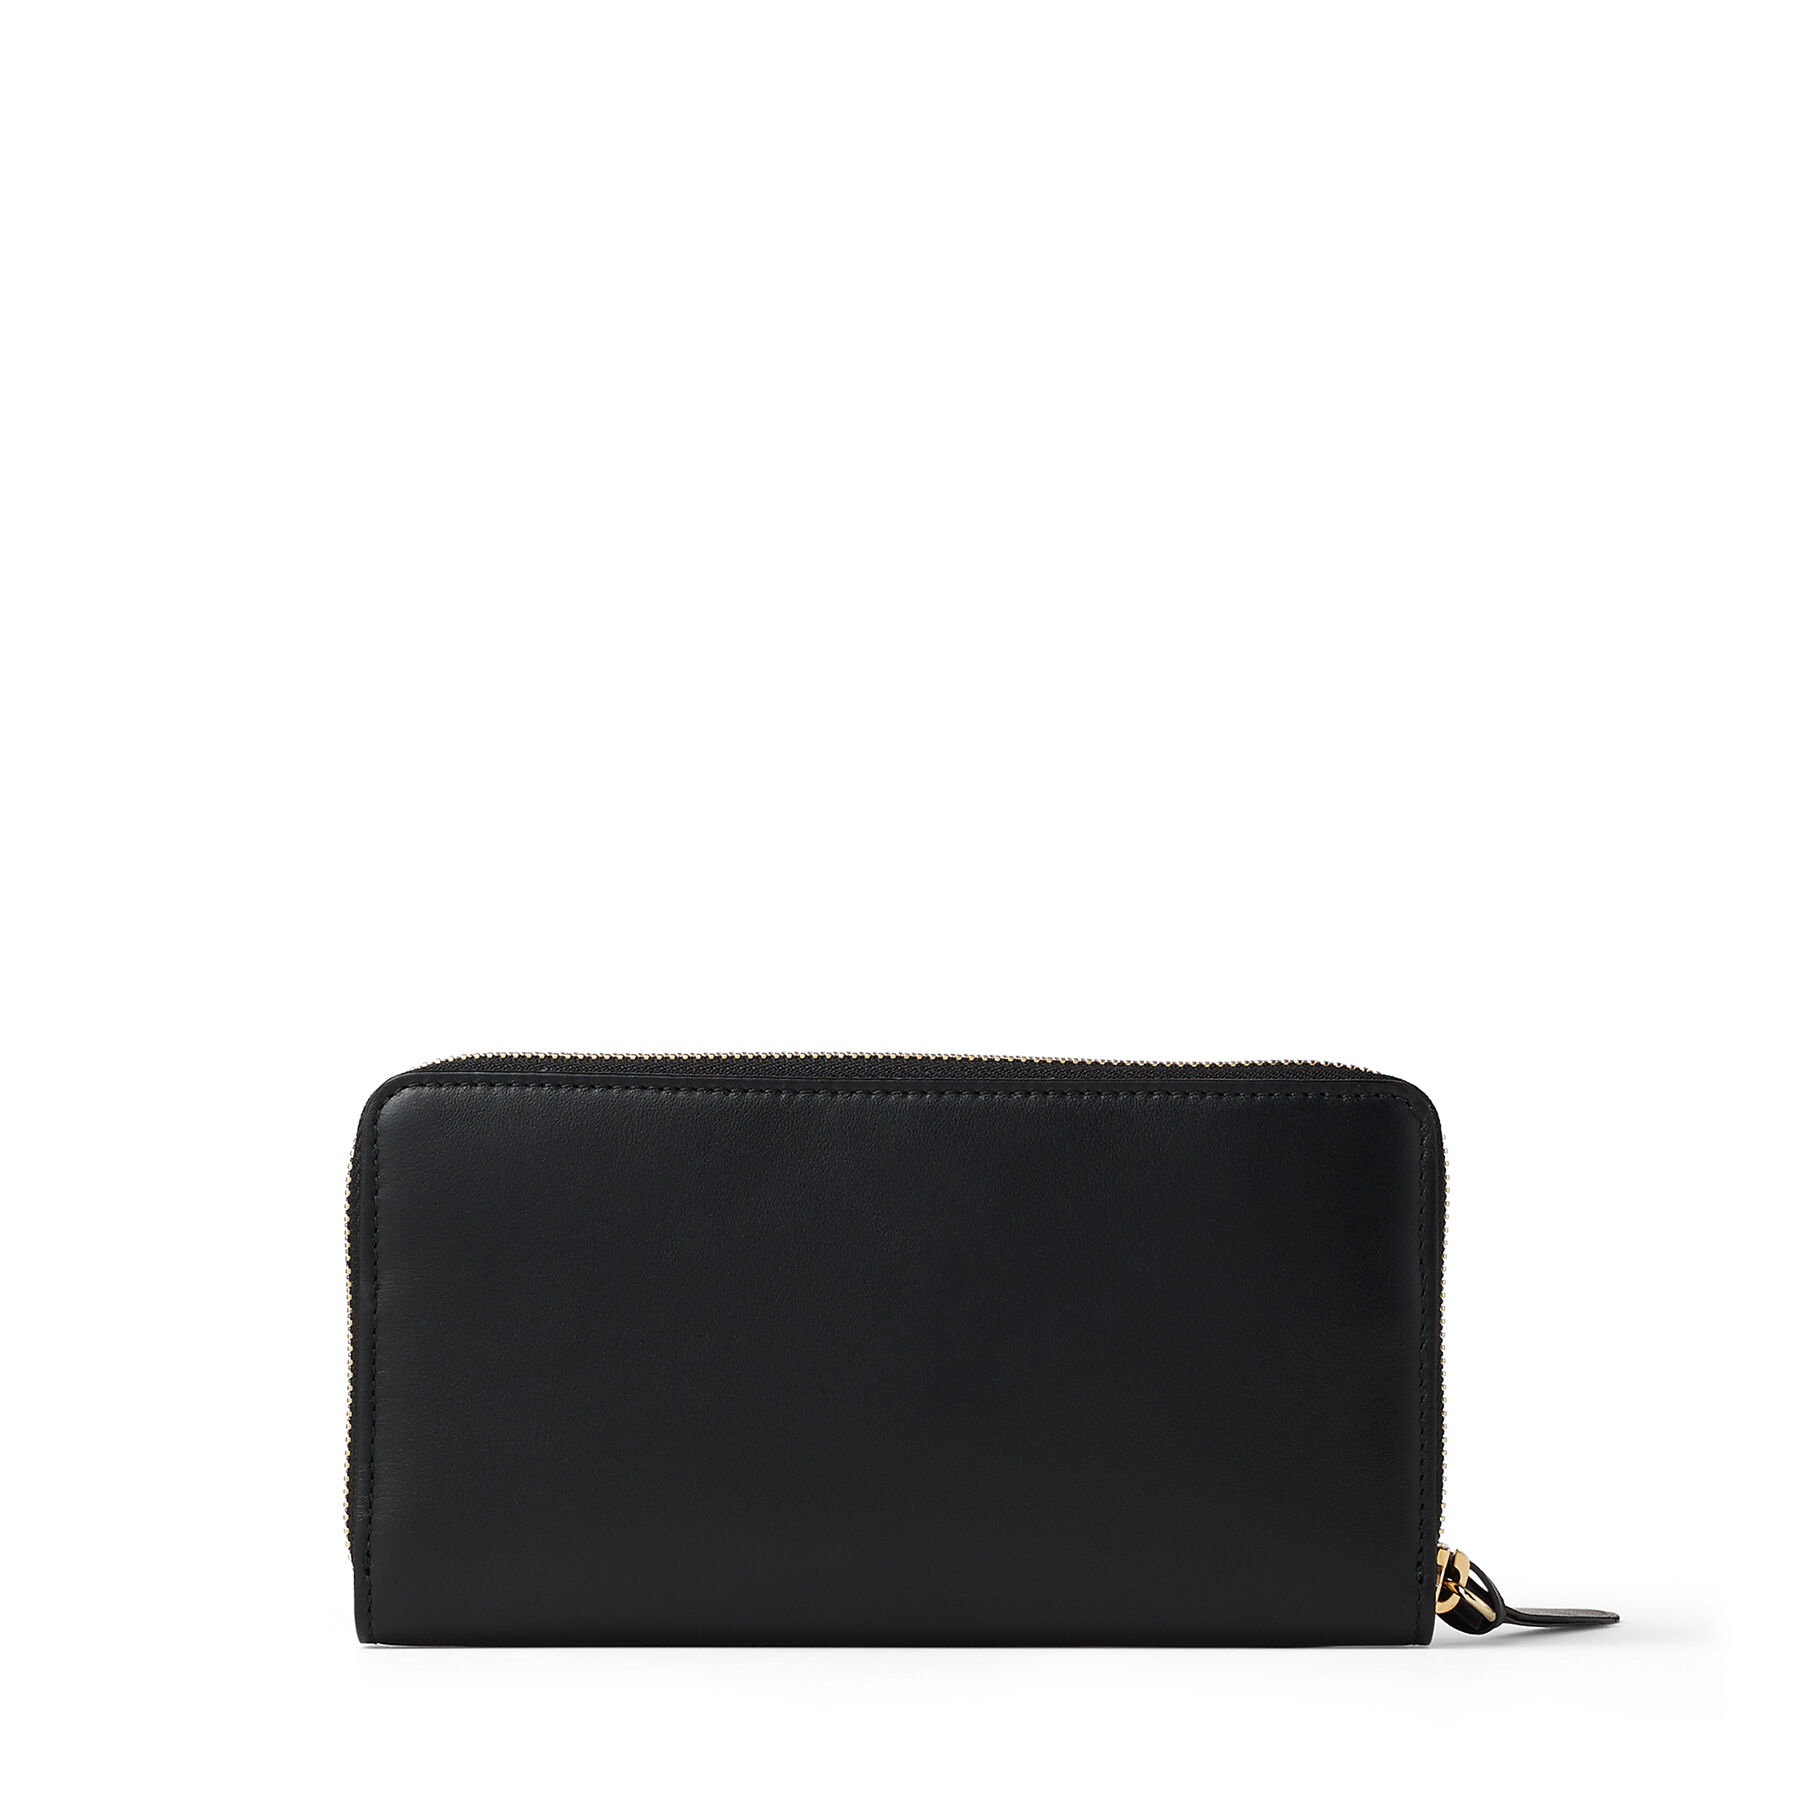 Black Smooth Calf Leather Wallet with JC Emblem |PIPPA |Cruise '20 